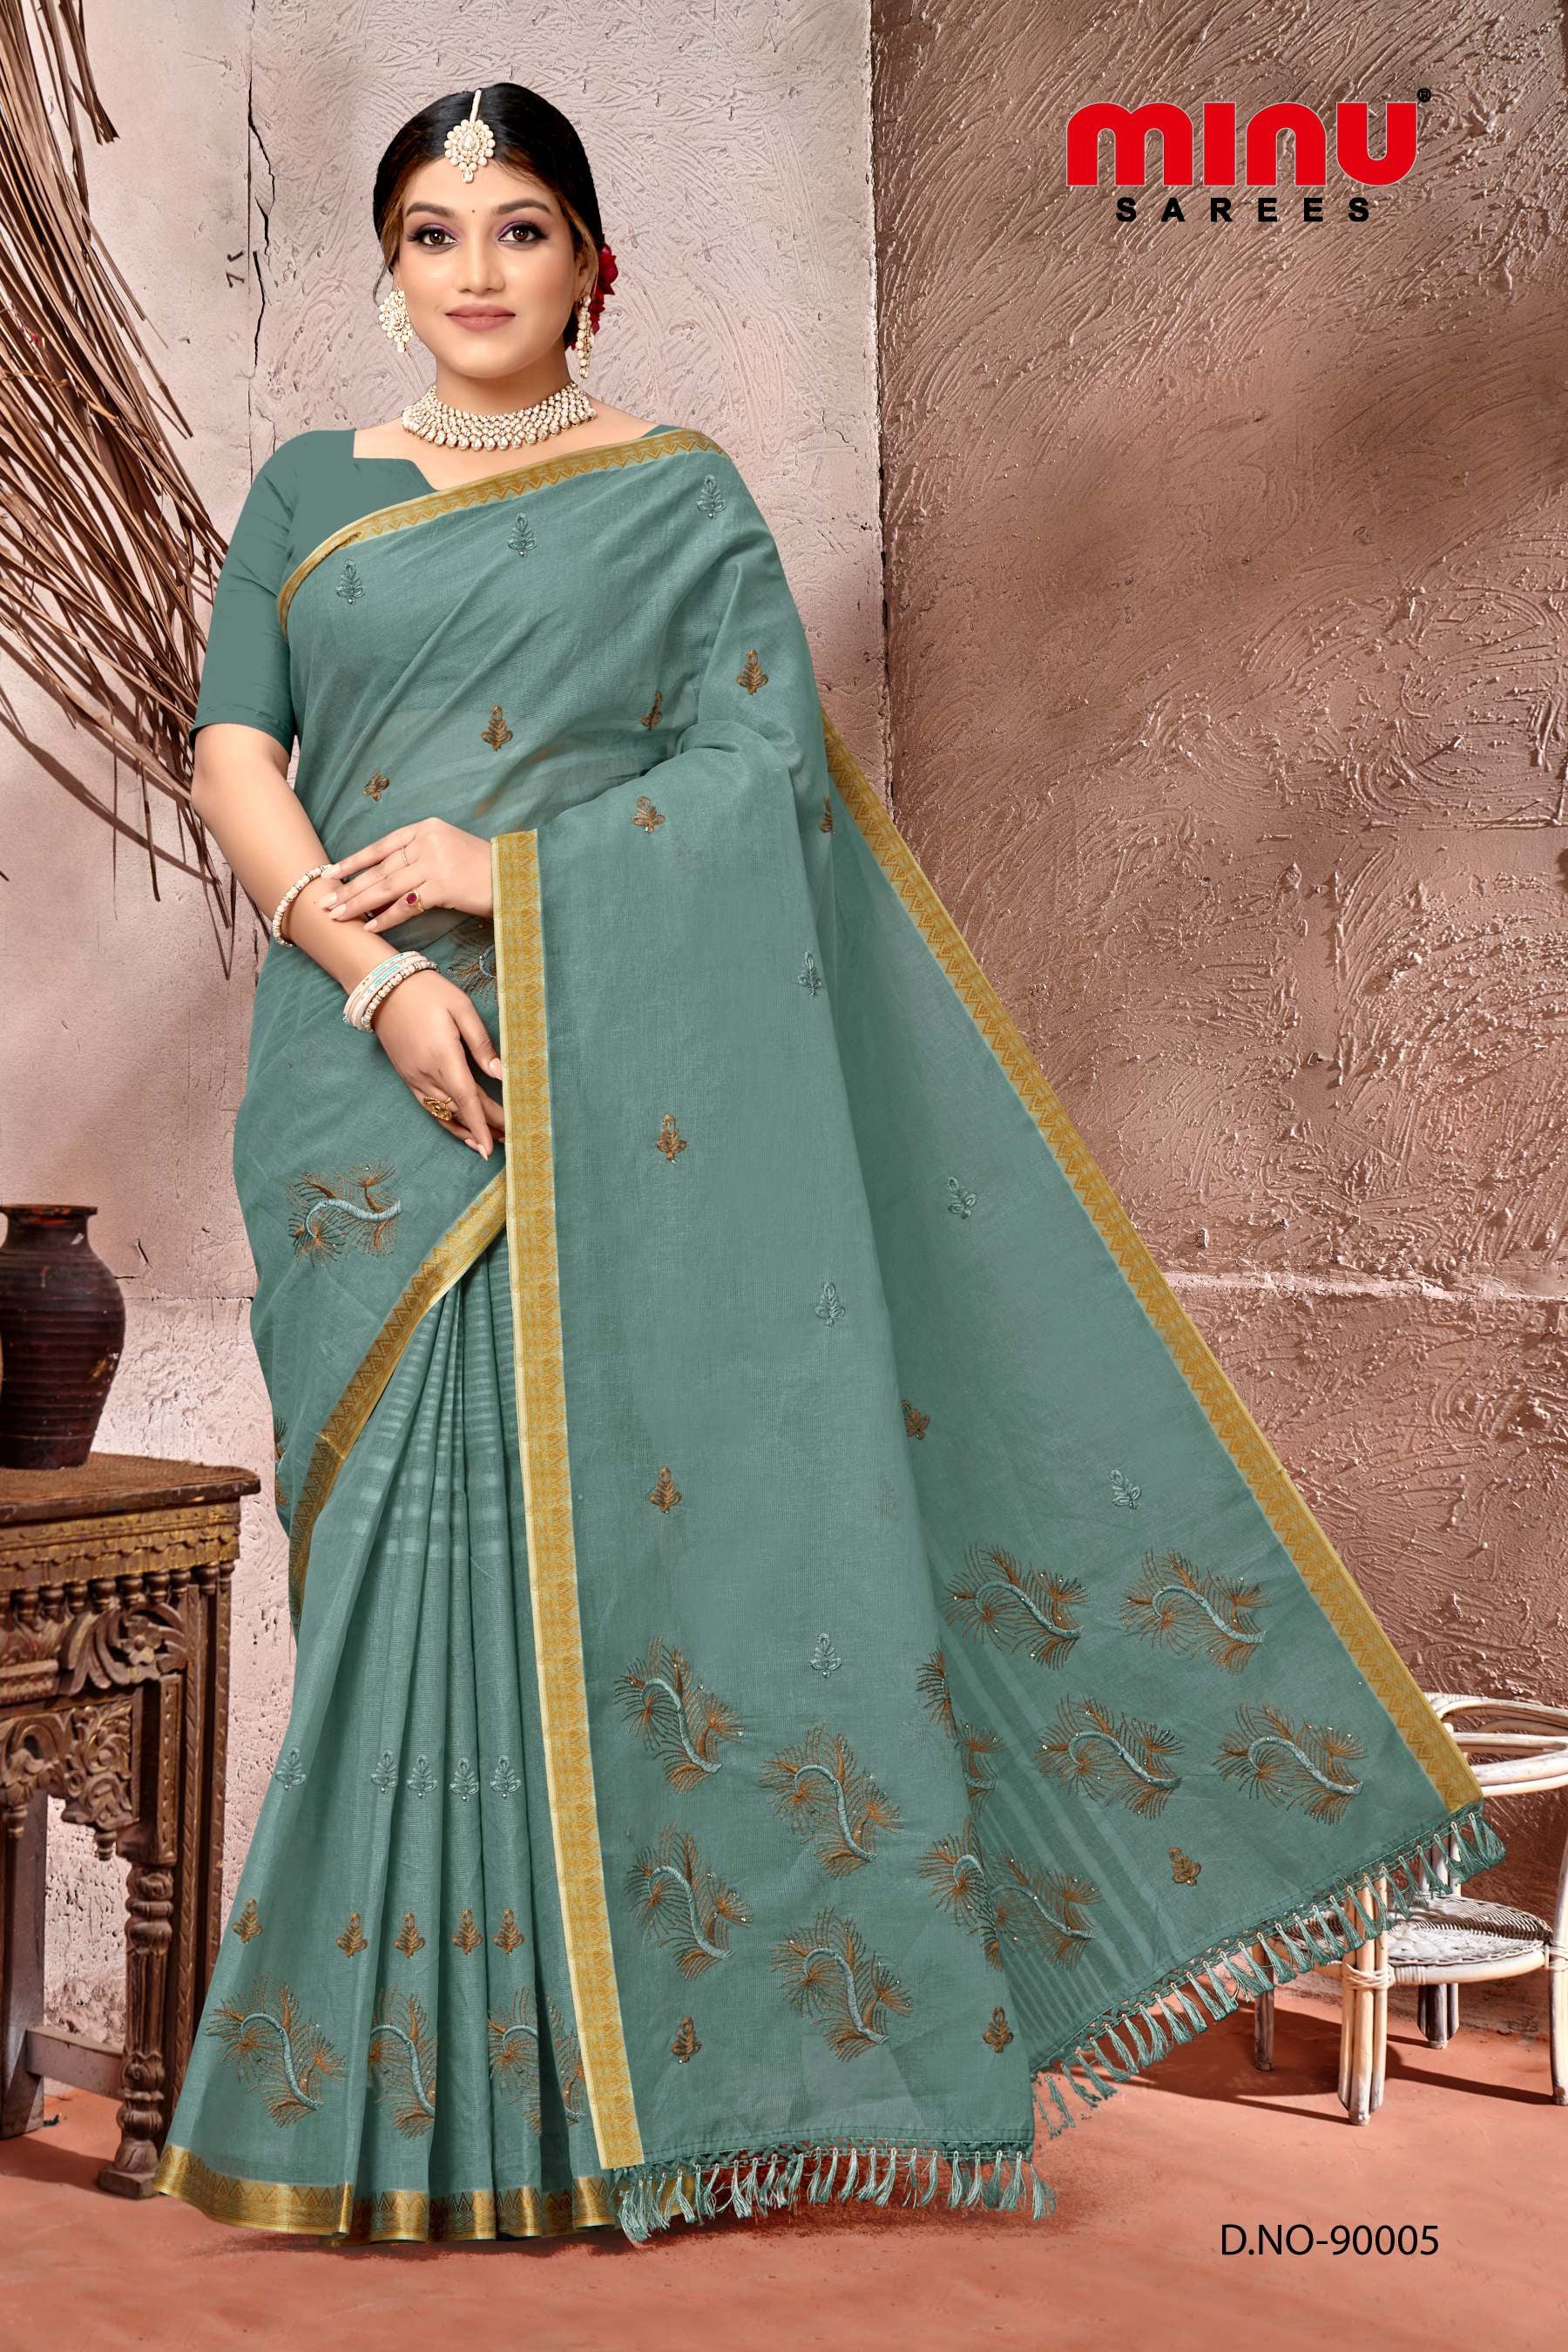 online image for woman wearing embroidered saree 